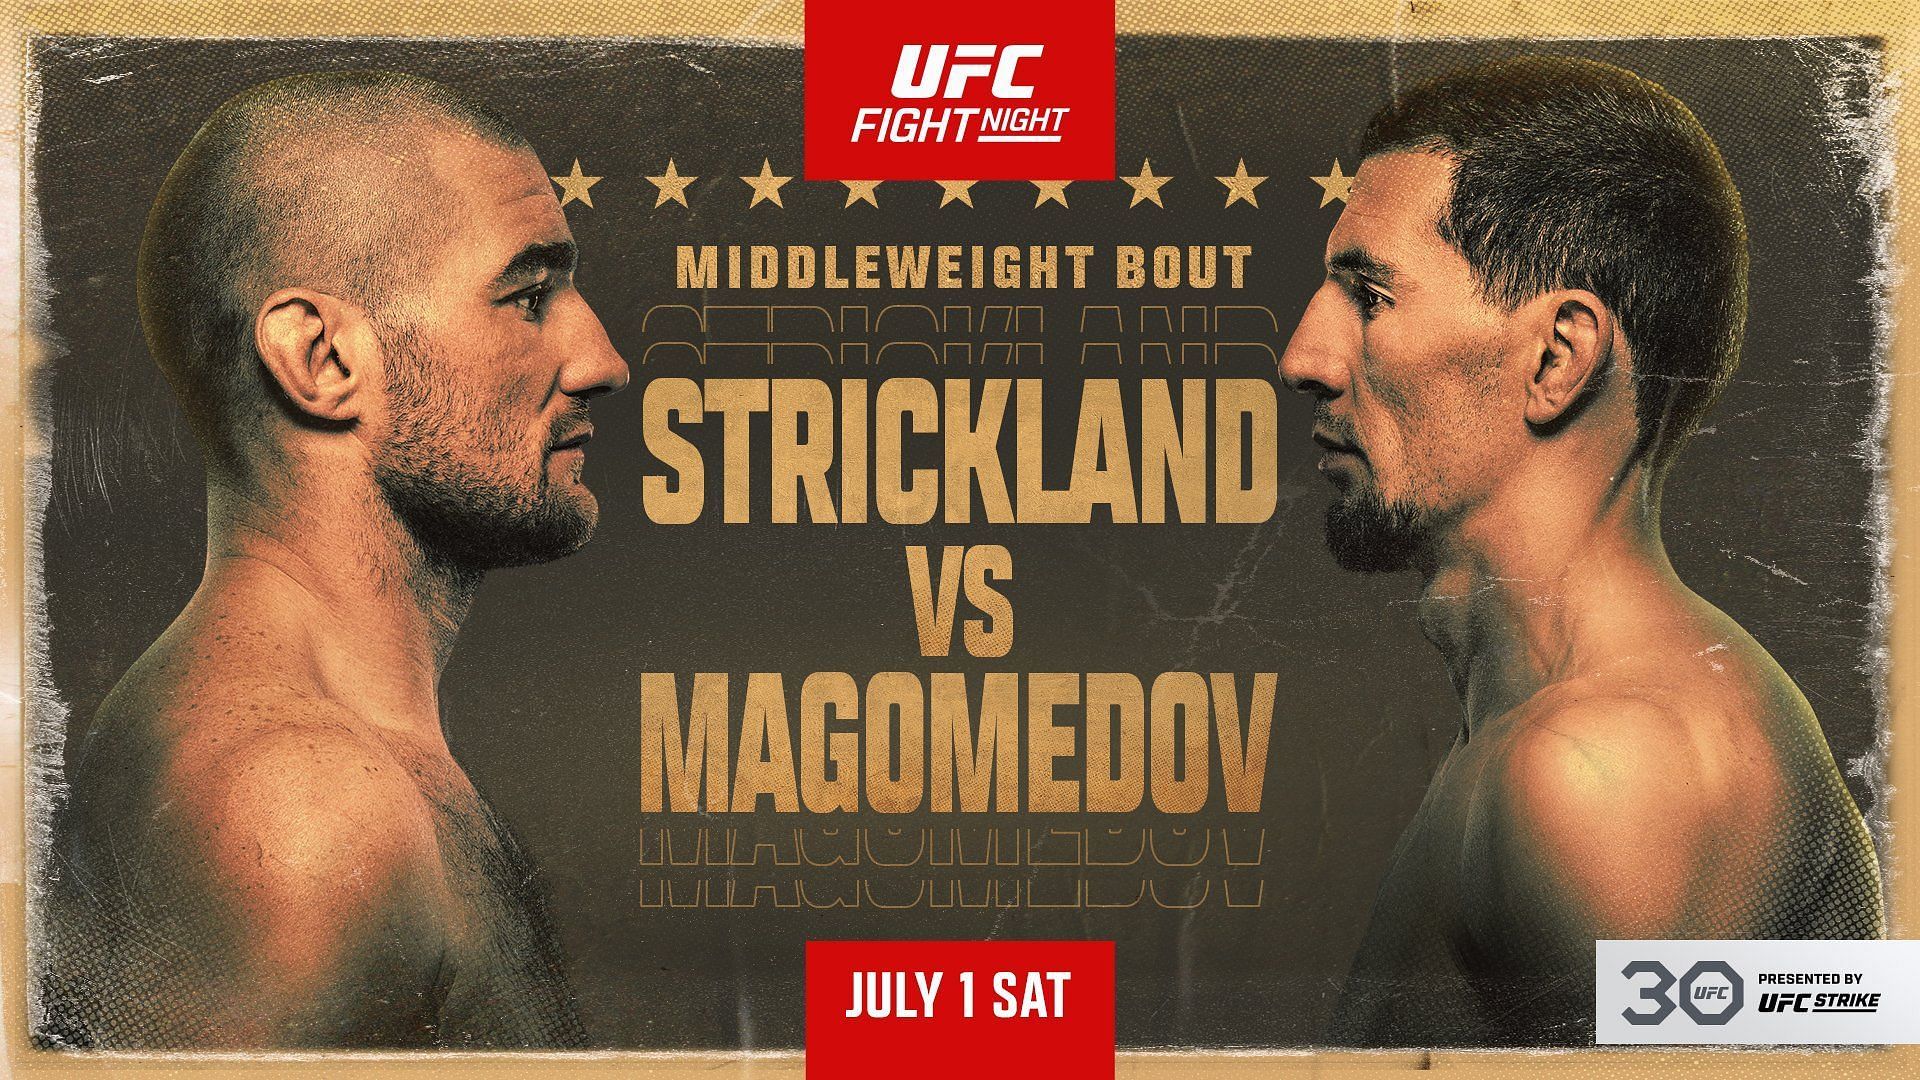 Professional Fighting, UFC, MMA Tickets & 2023-2024 Matchup Schedules